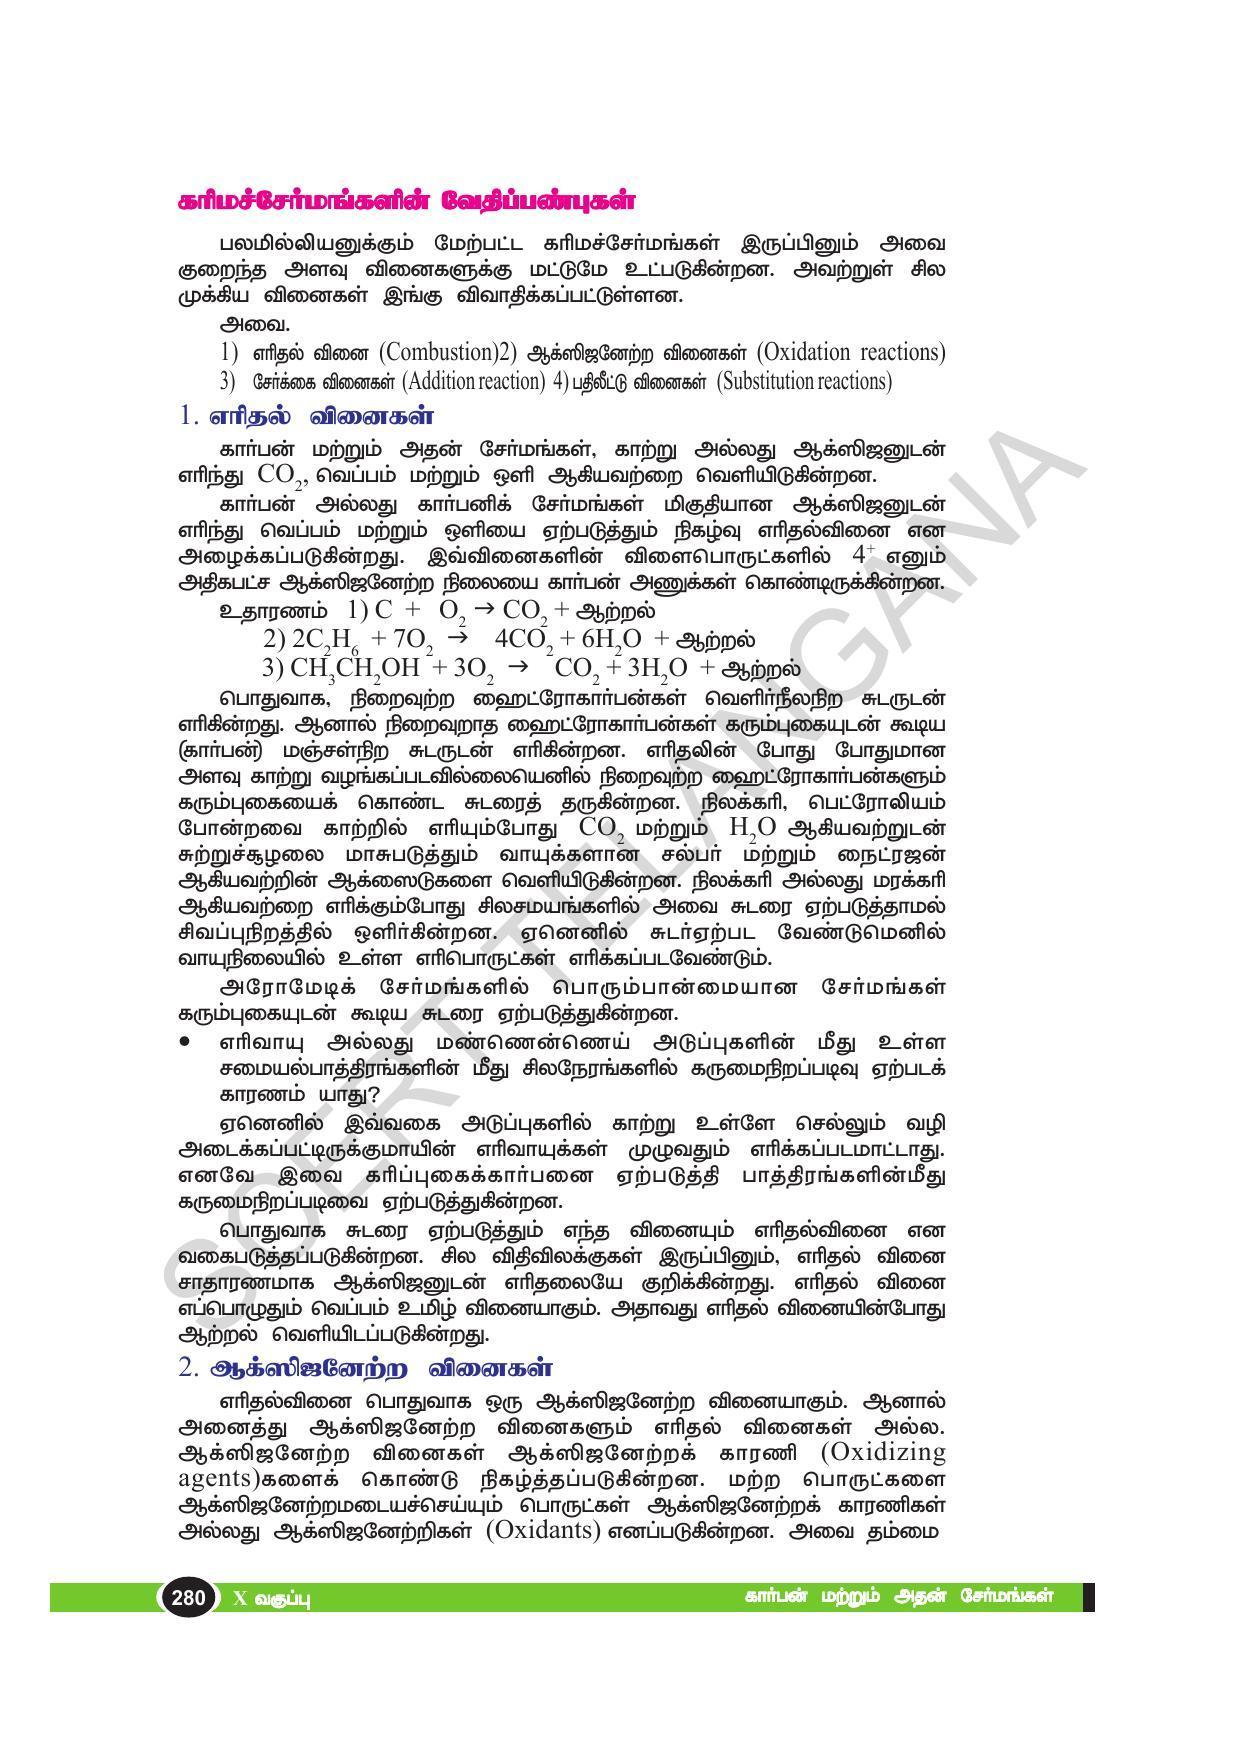 TS SCERT Class 10 Physical Science(Tamil Medium) Text Book - Page 292